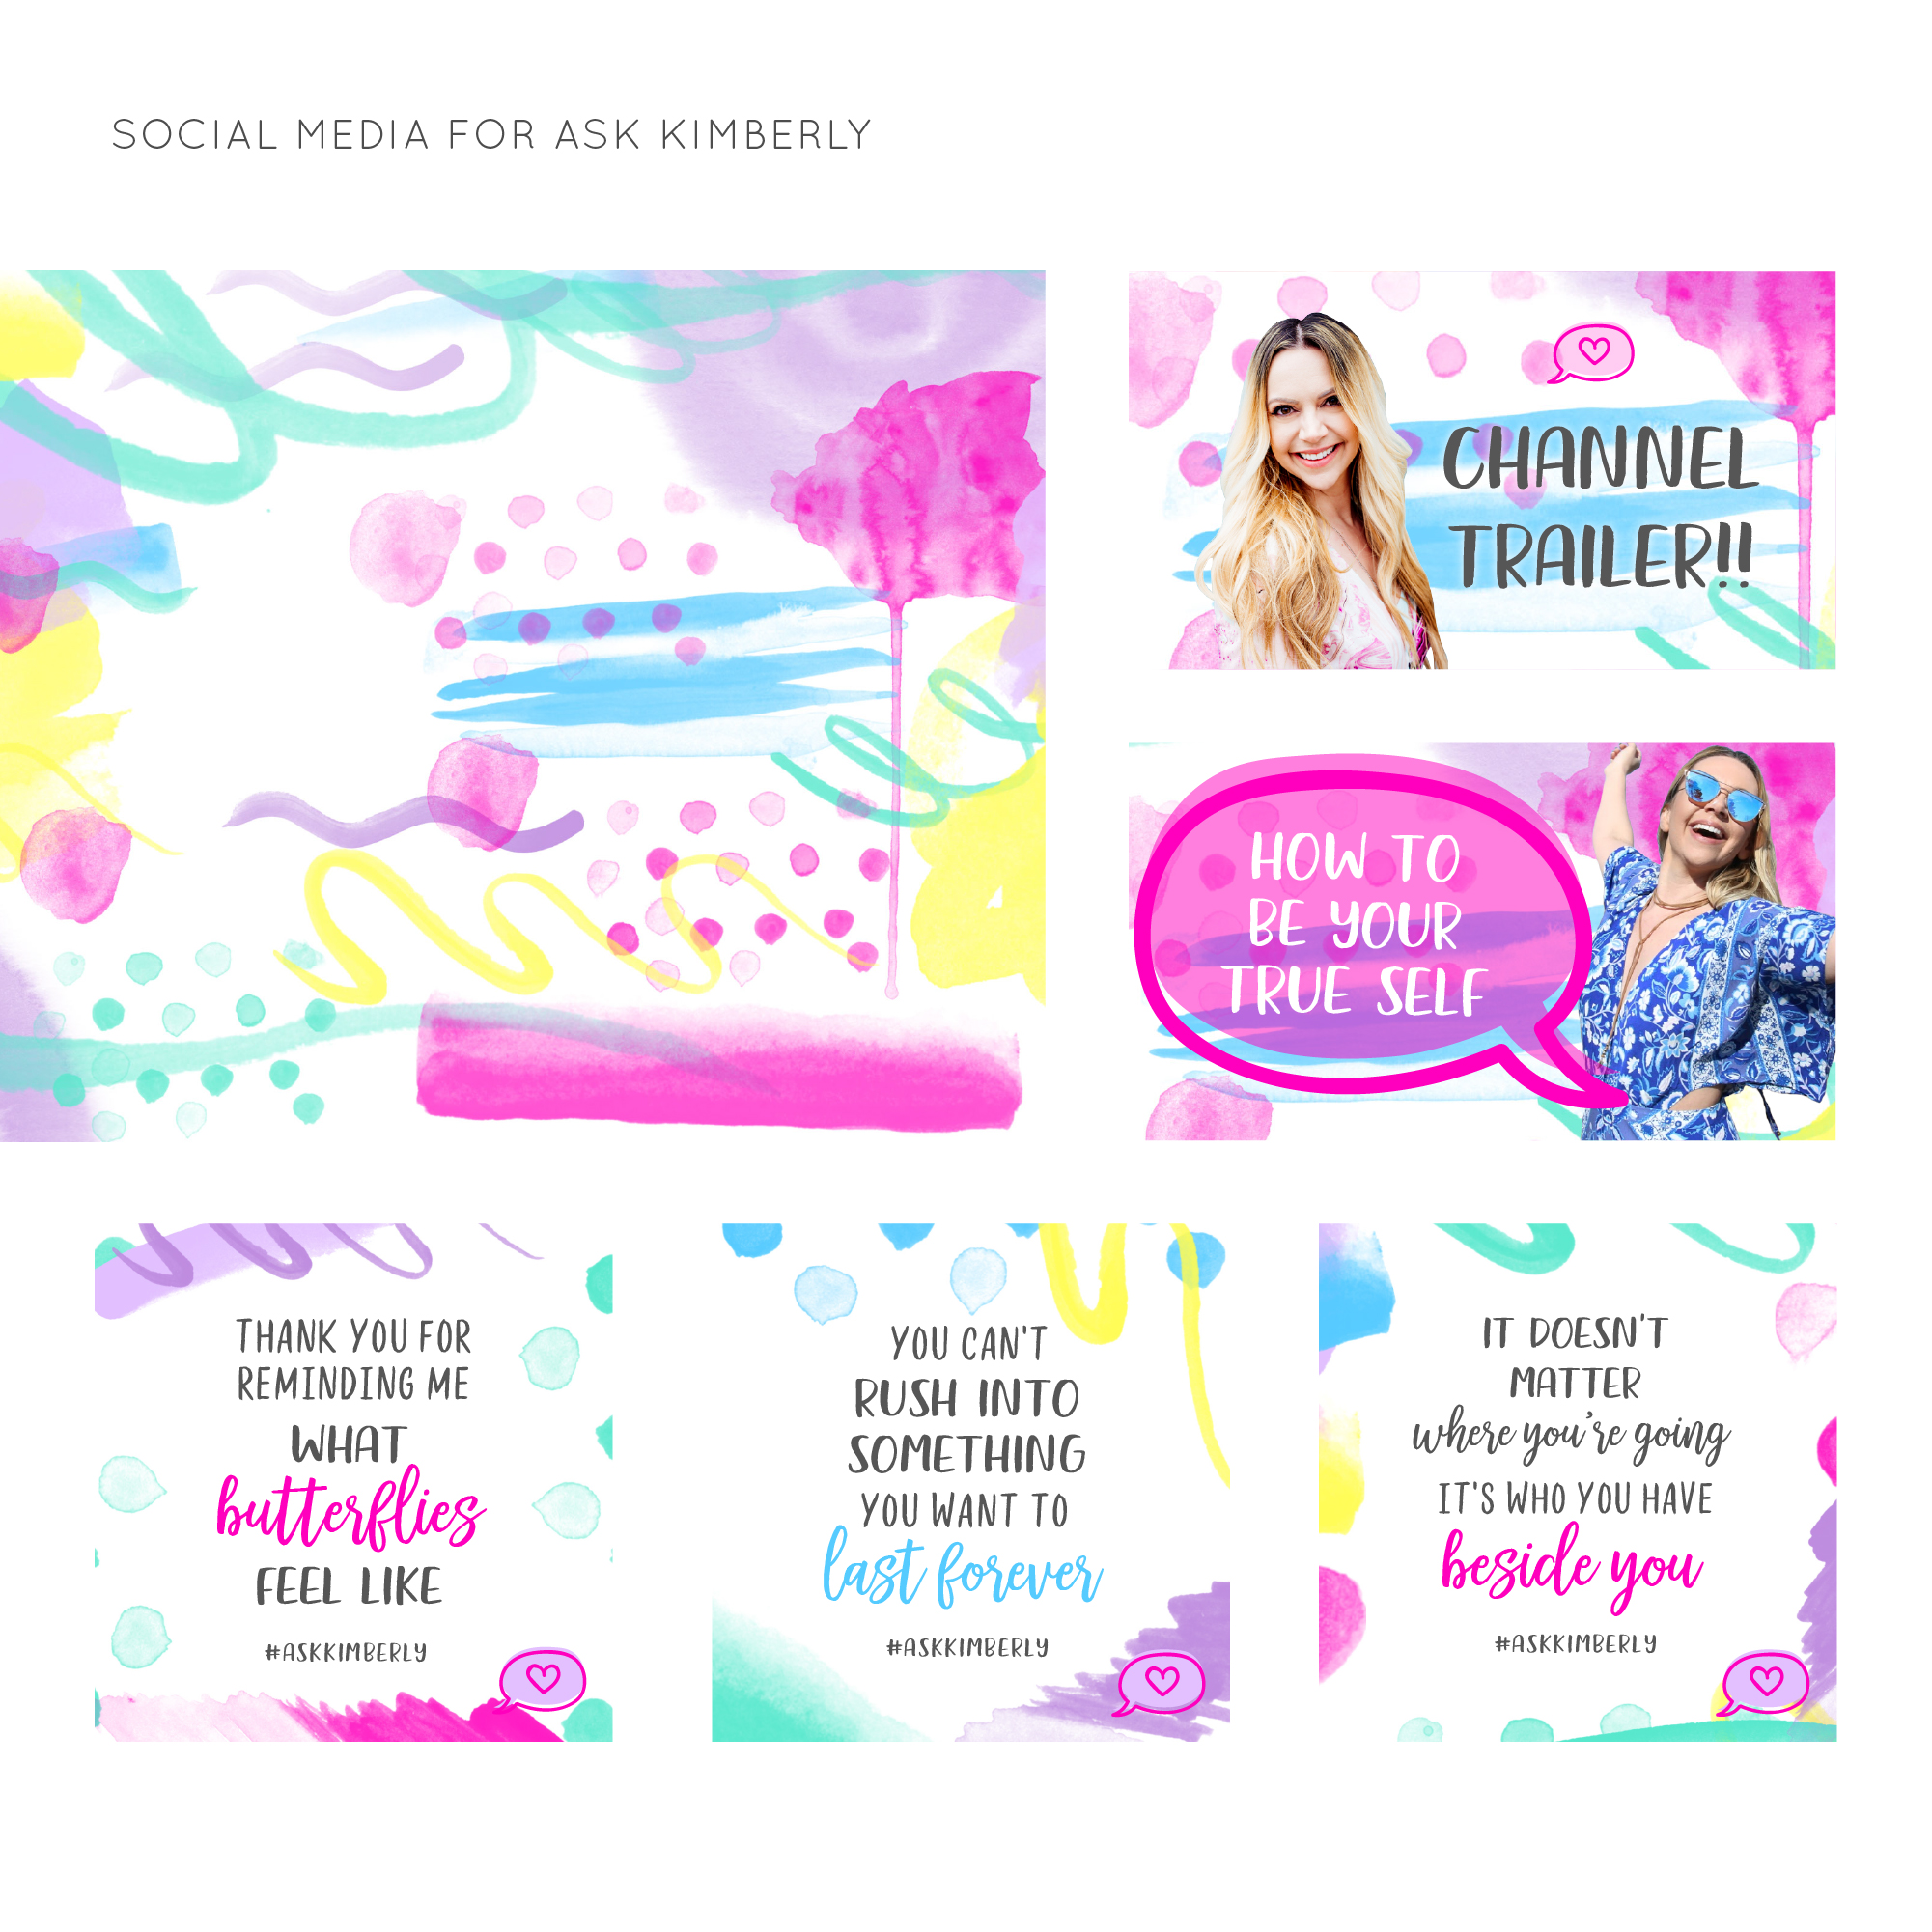 Illustration and social media for Ask Kimberly by Frances Verbeek